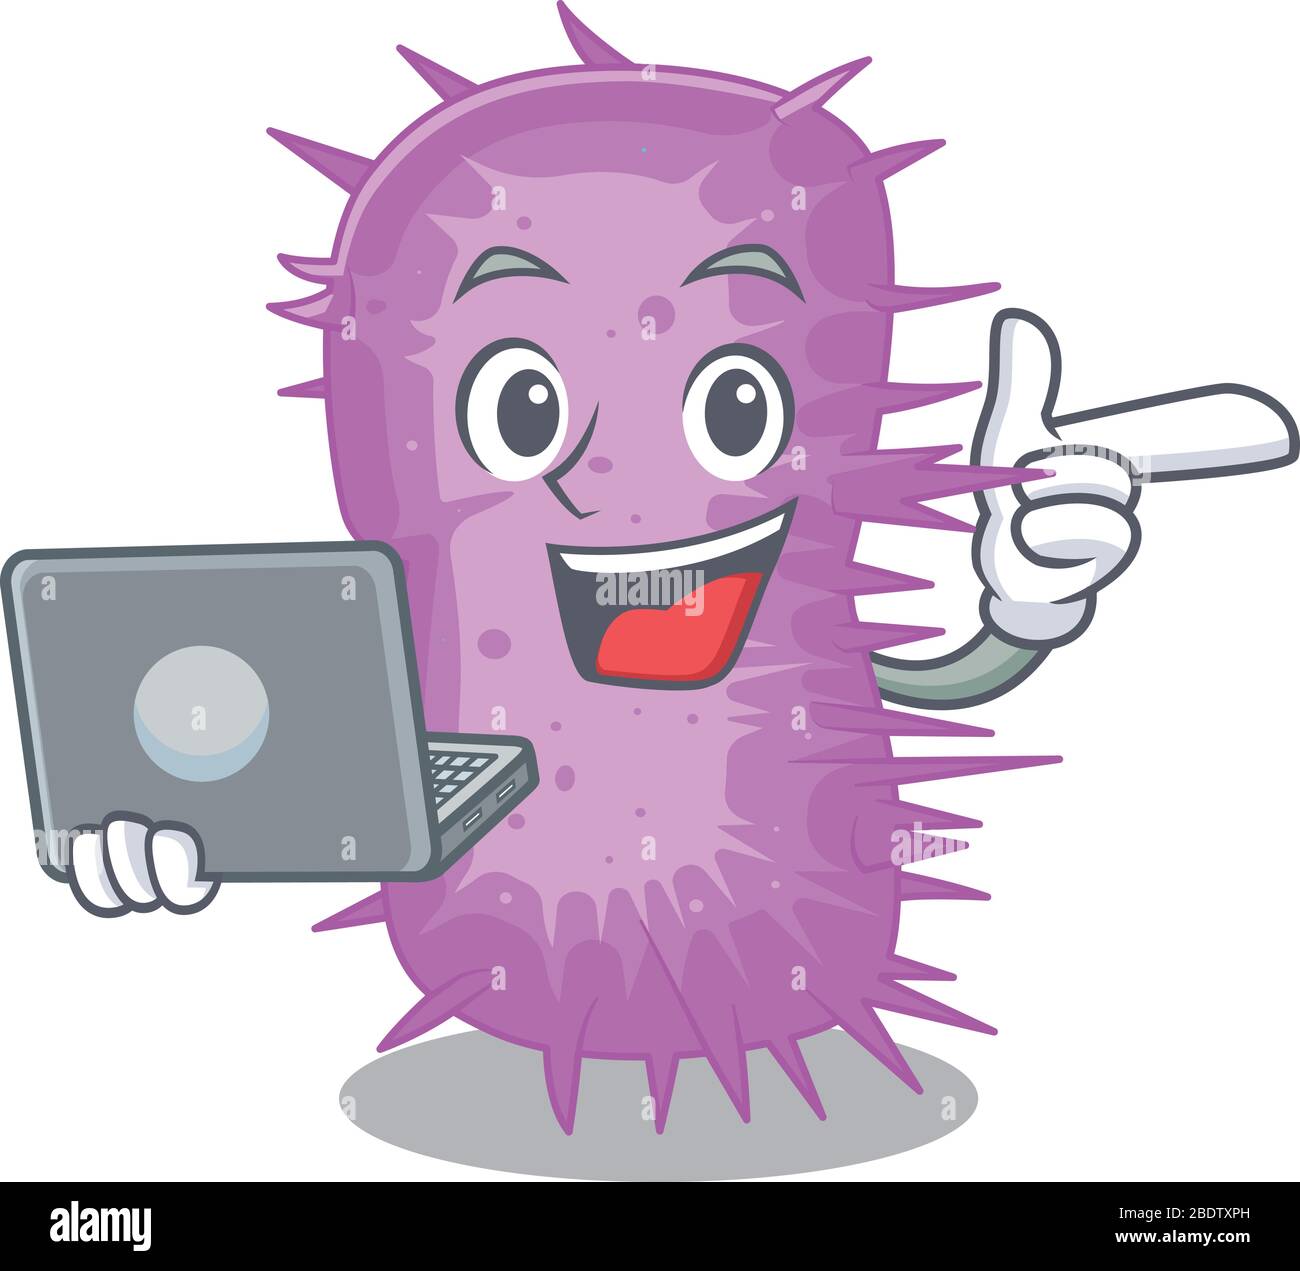 Cartoon character of acinetobacter baumannii clever student studying with a laptop Stock Vector